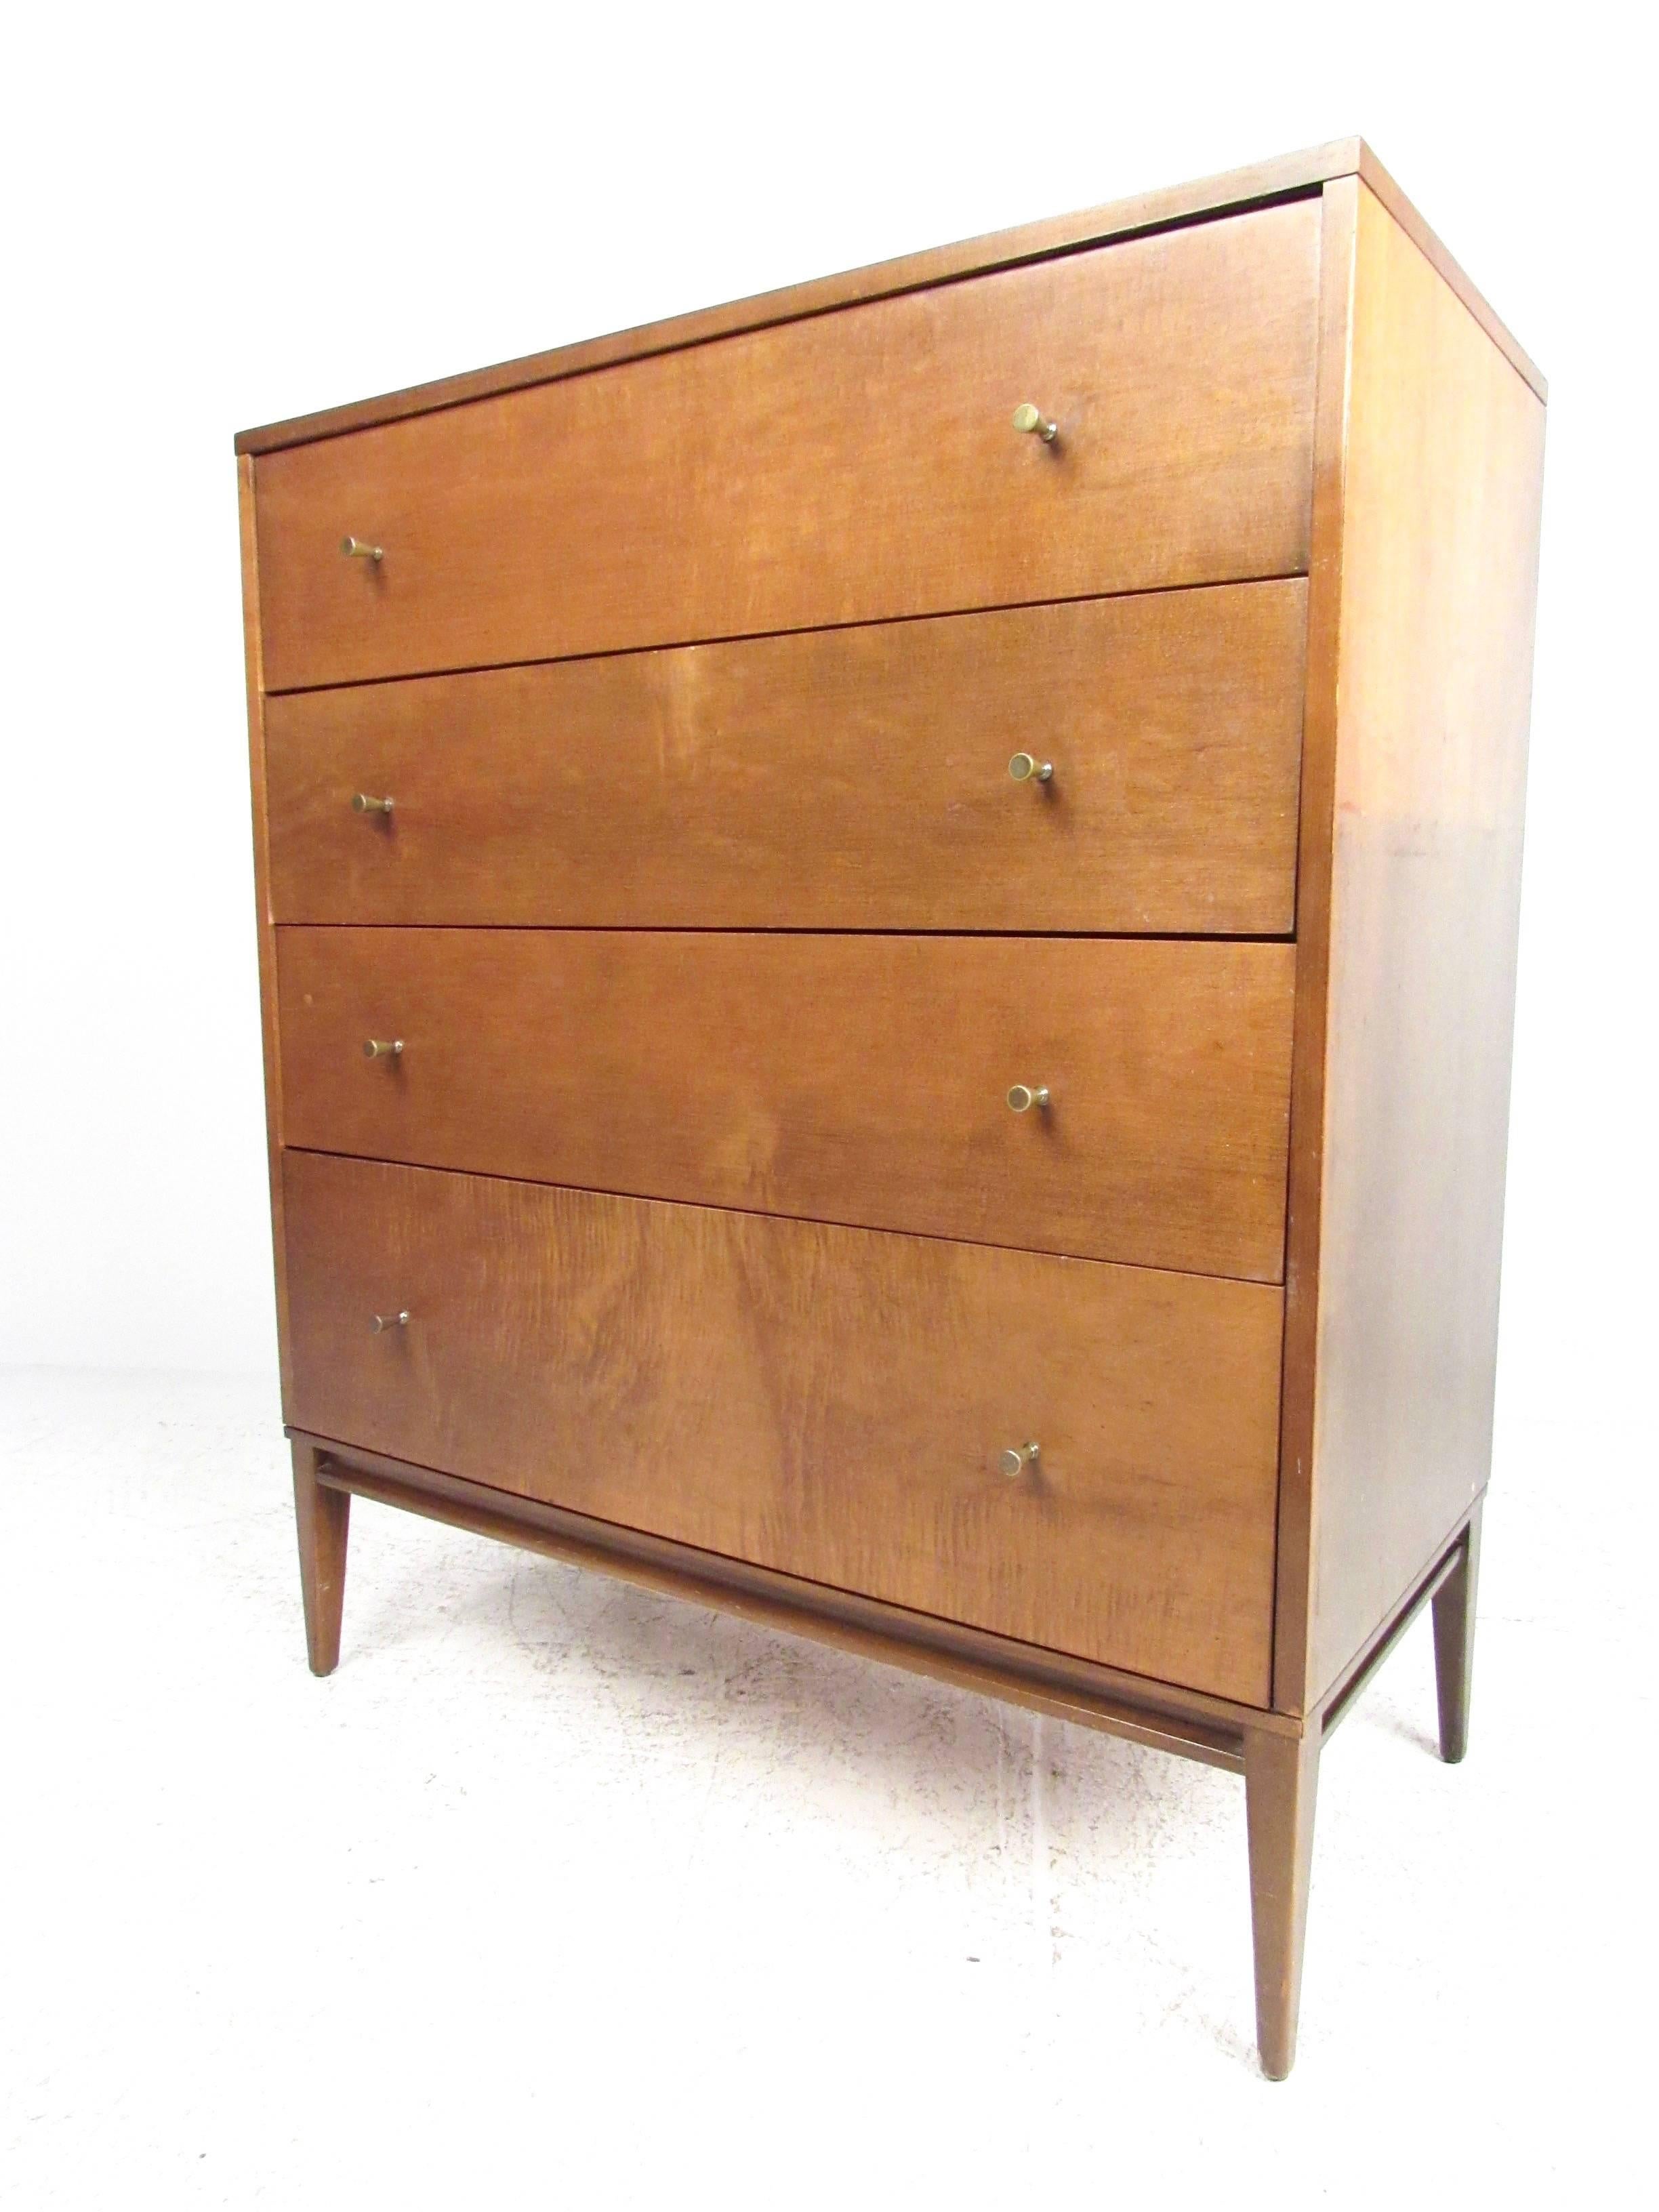 This stylish maple dresser by Paul McCobb for Winchendon boasts a lovely vintage maple finish, Classic McCobb style drawer pulls, and still has the original paper tag attached. Perfect four-drawer dresser for any interior, please confirm item